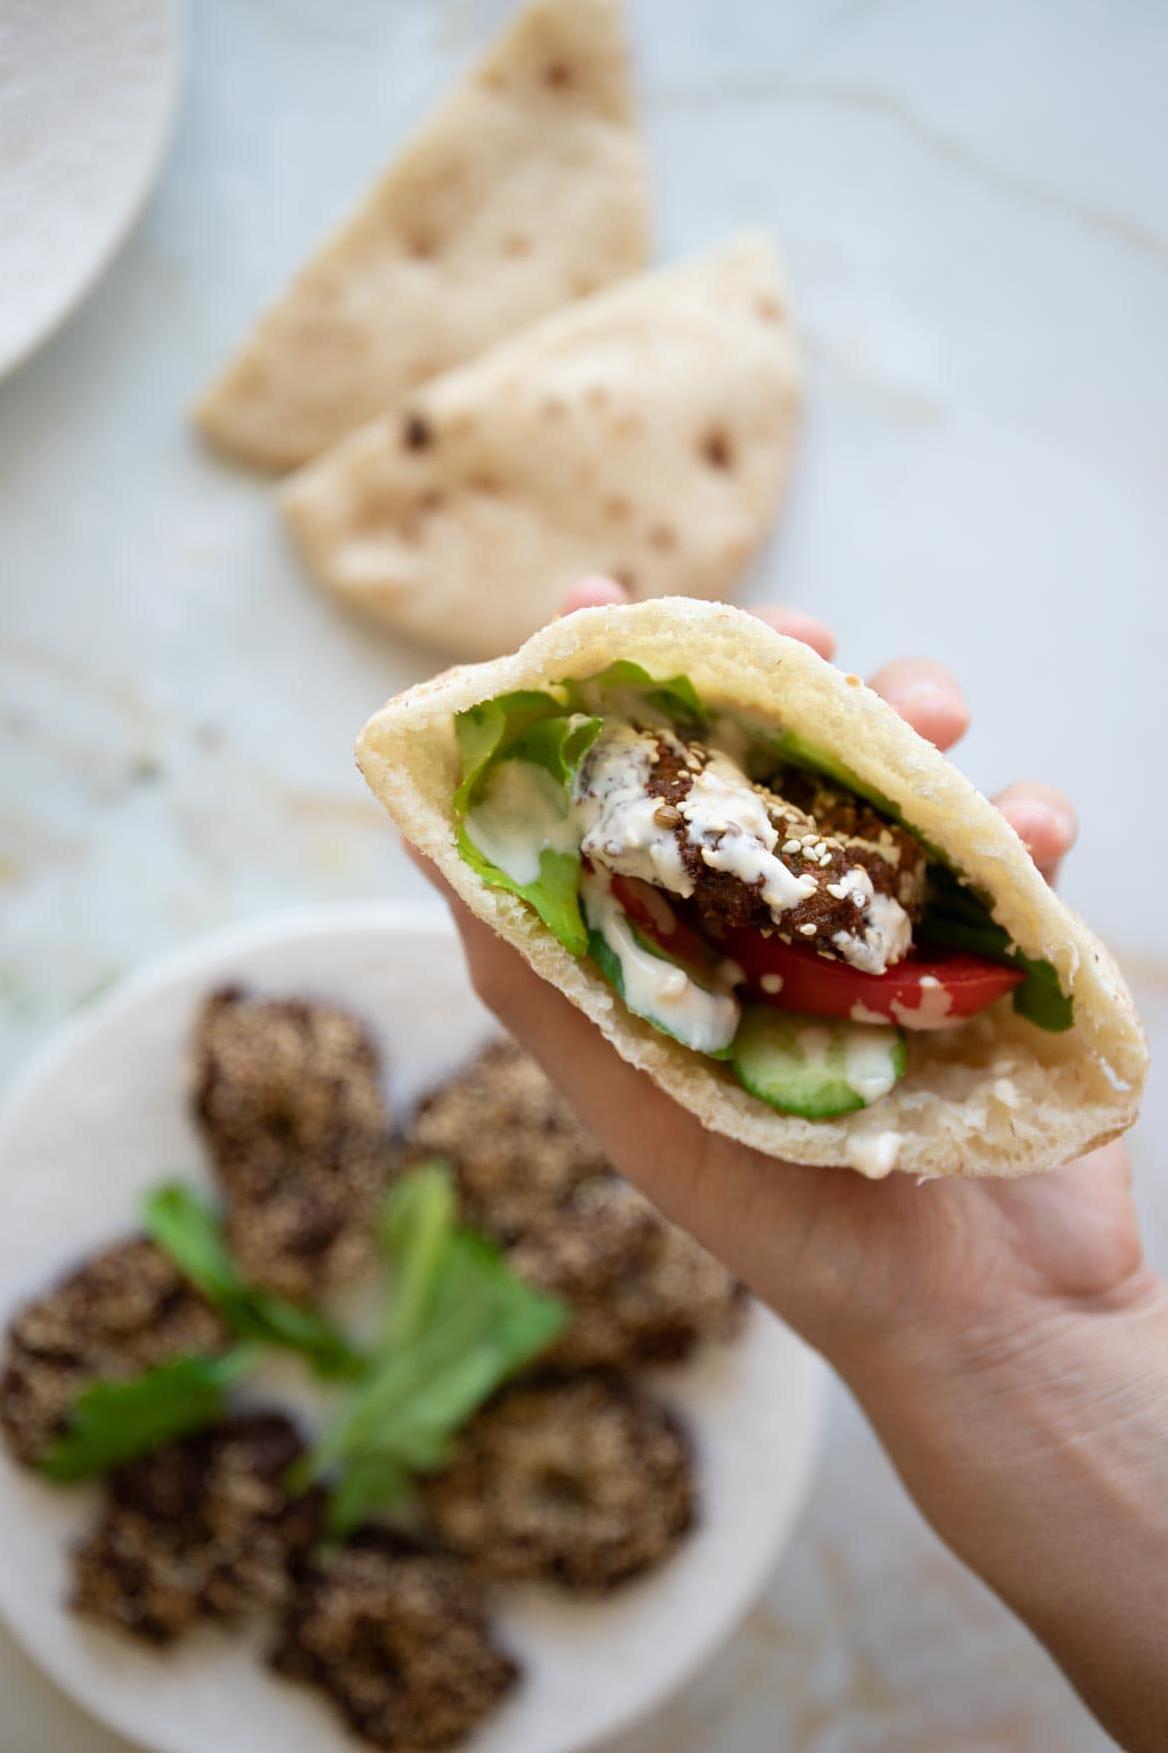  Filled with nutritious ingredients, these falafel are a great source of protein.